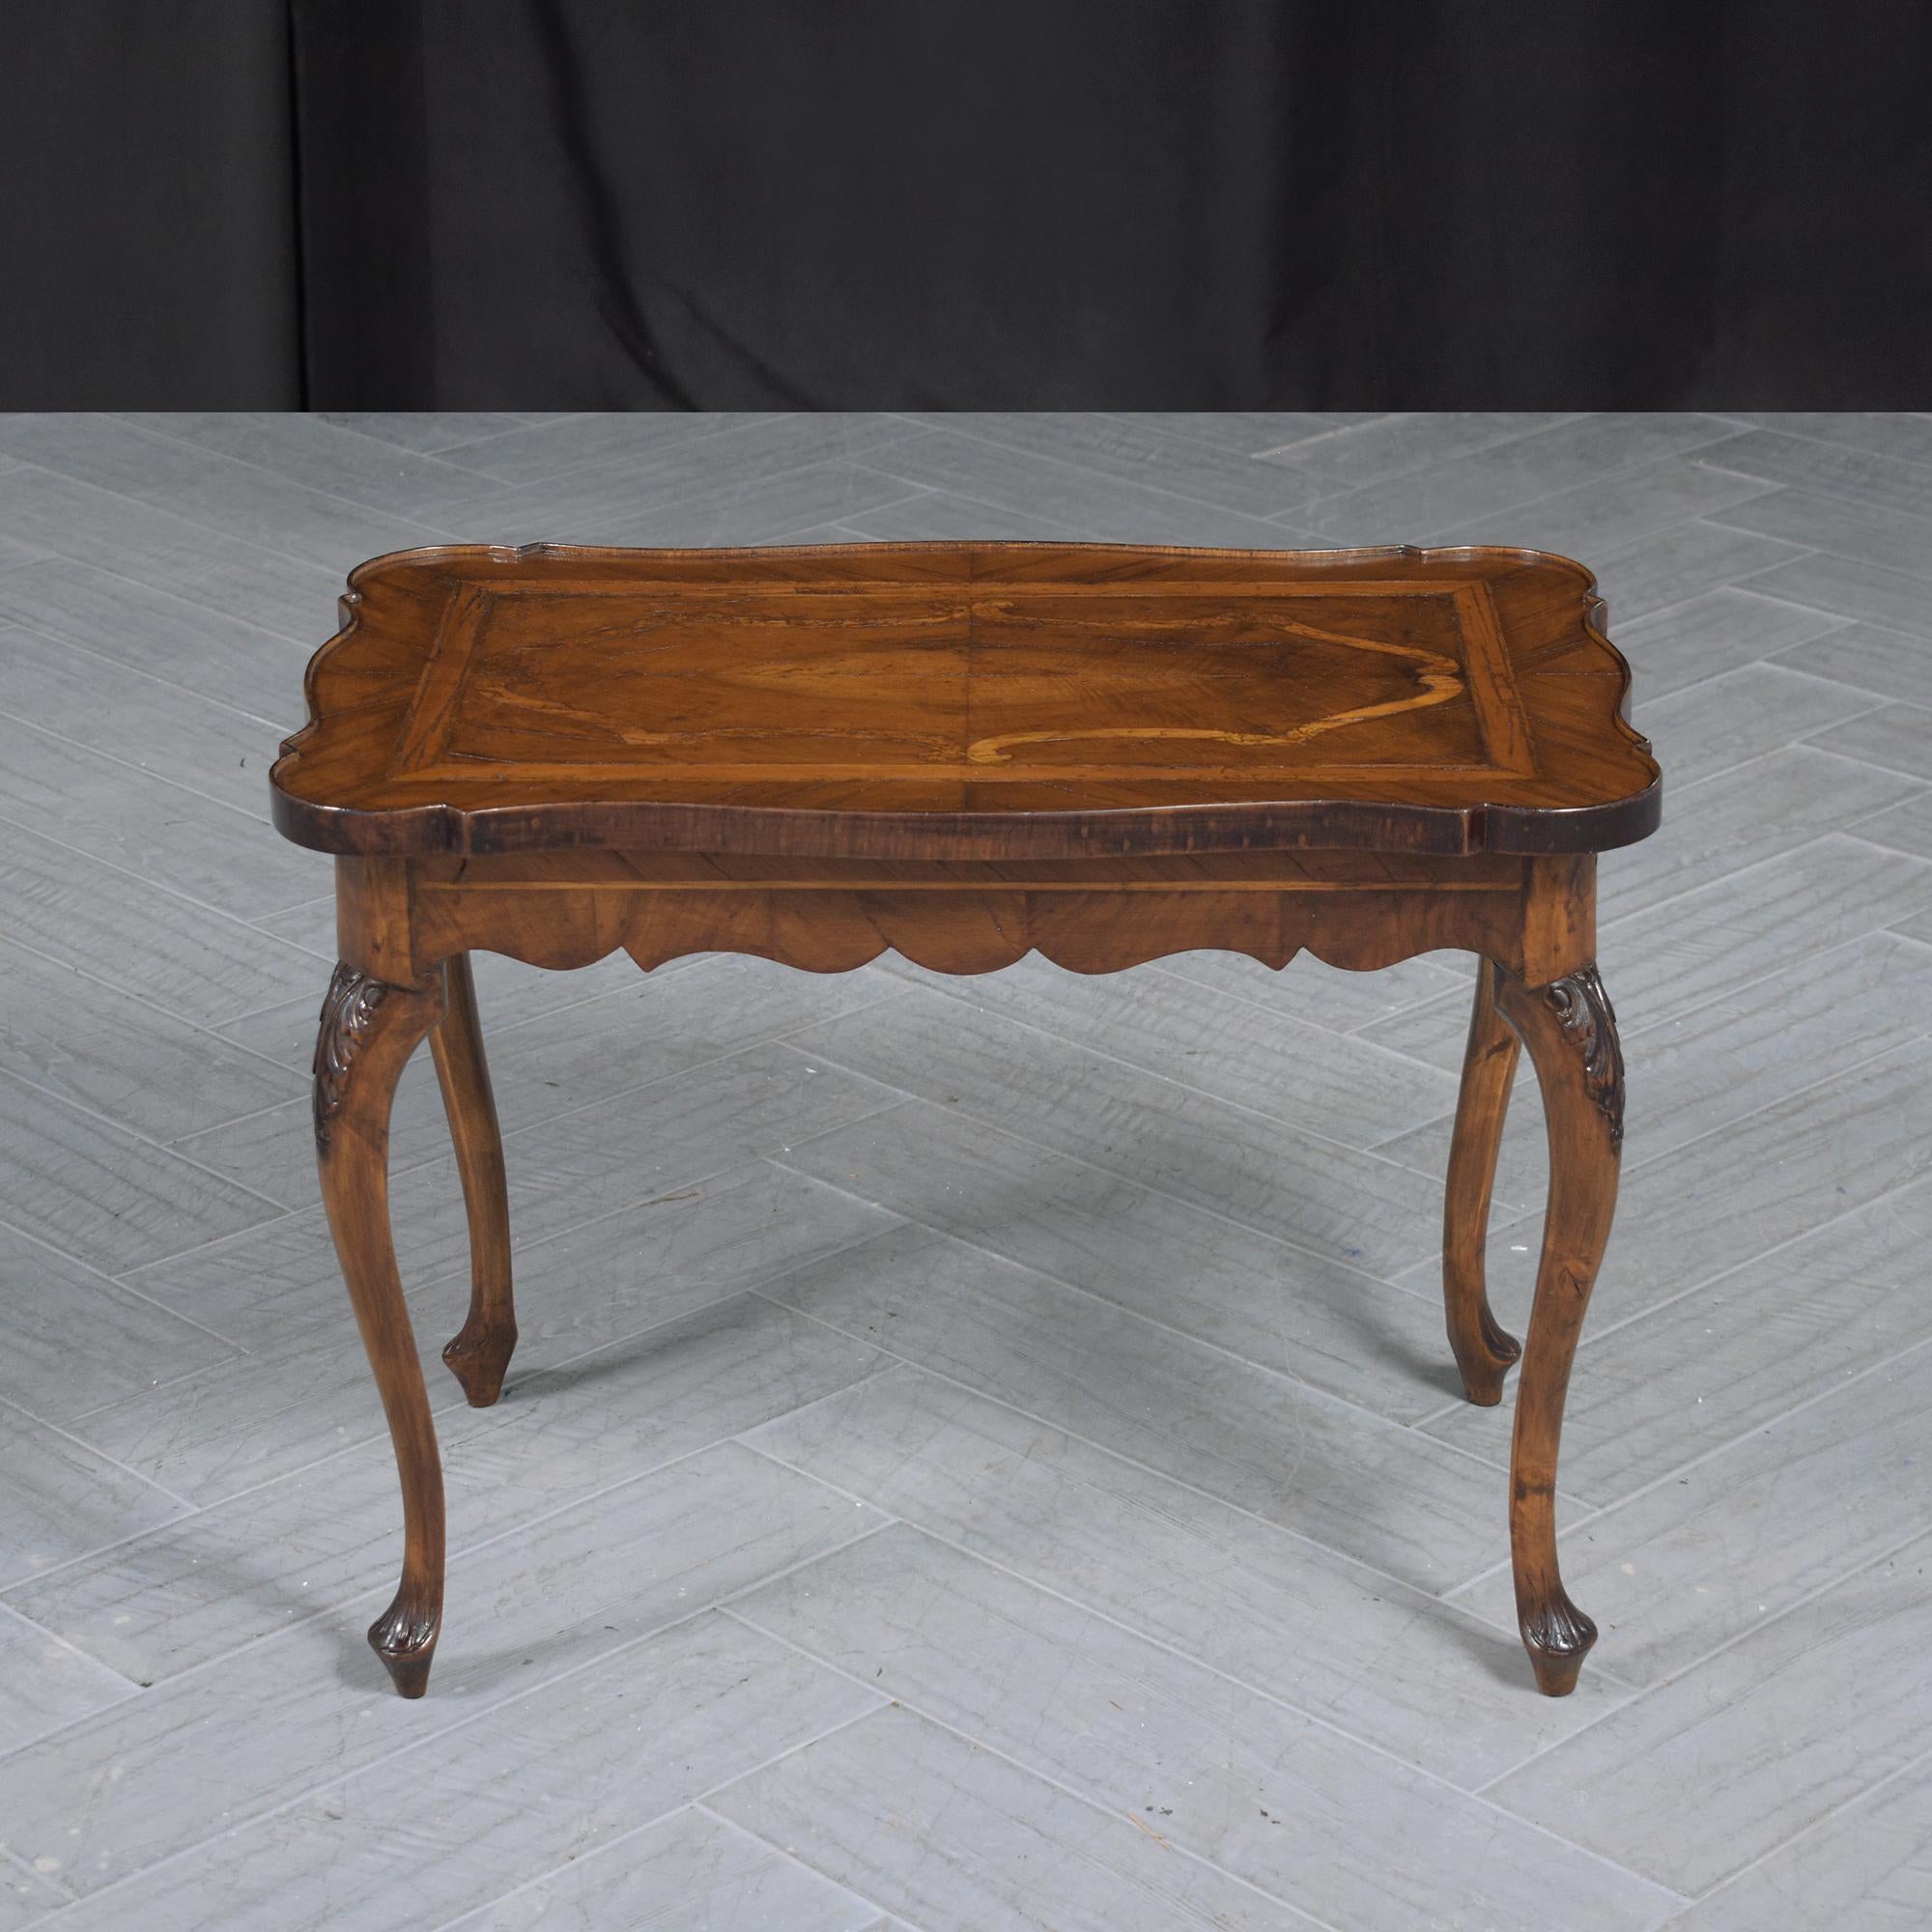 Late 19th-Century English Walnut Side Table: Antique Elegance Restored In Good Condition For Sale In Los Angeles, CA